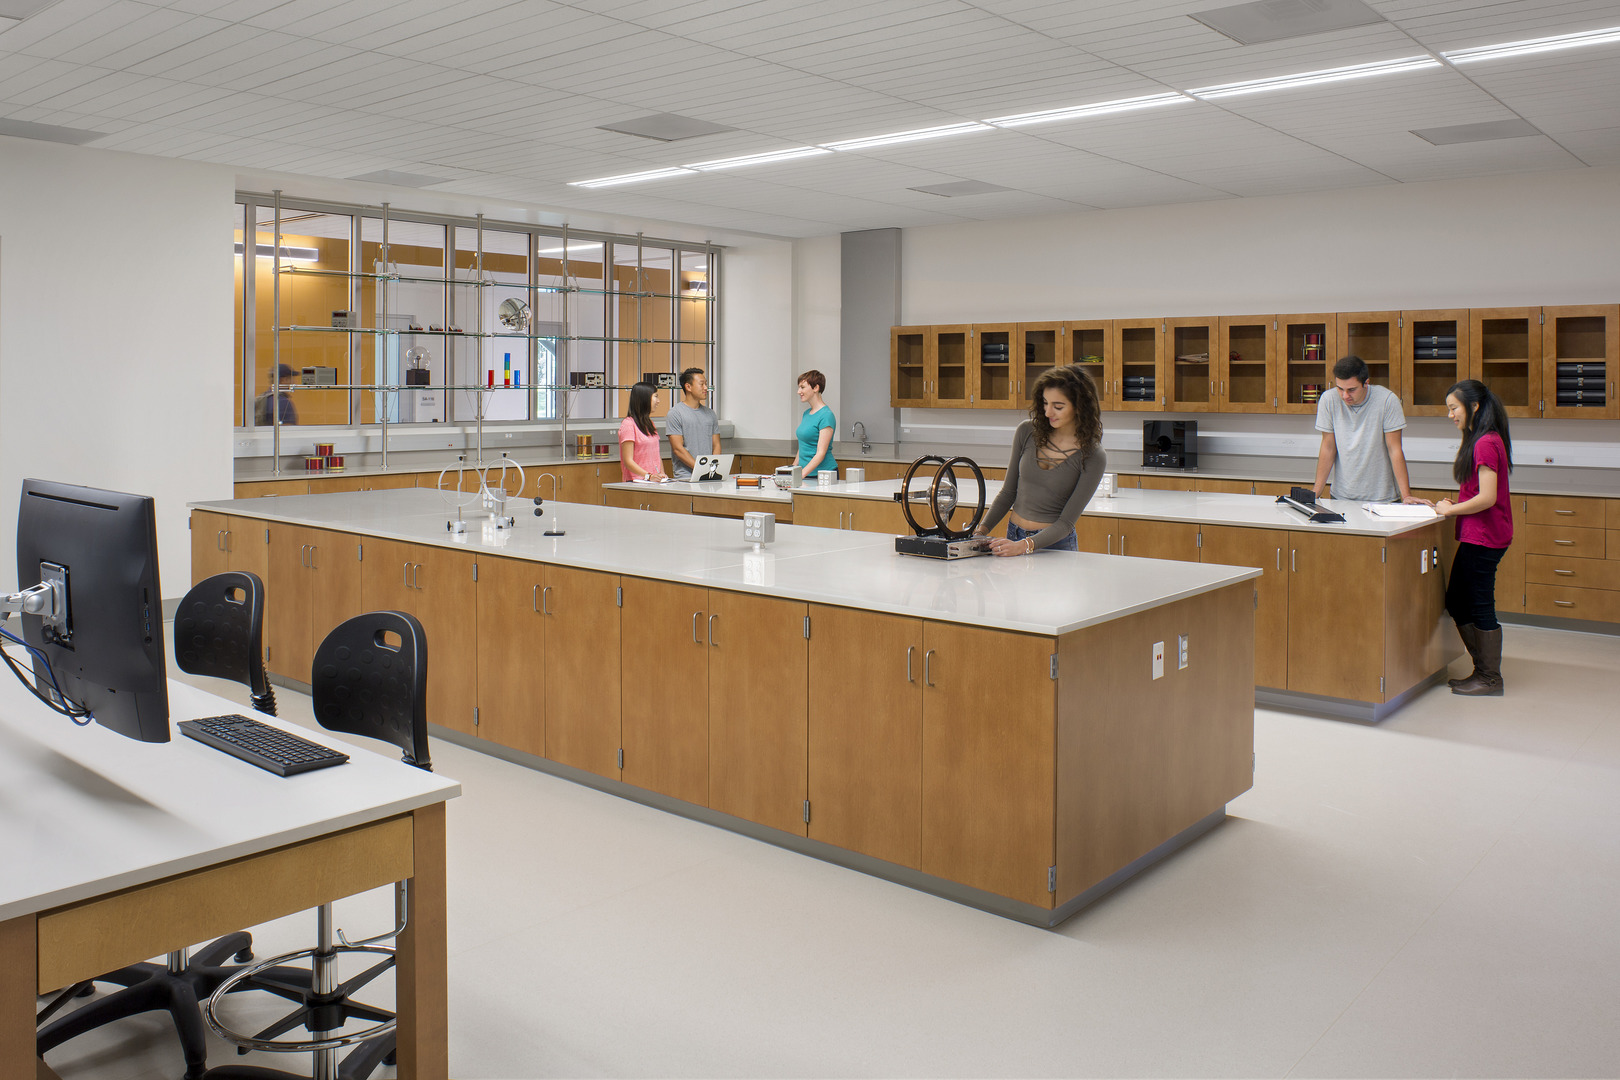 STEM buildings rely heavily on thoughtful dry and wet laboratory design.